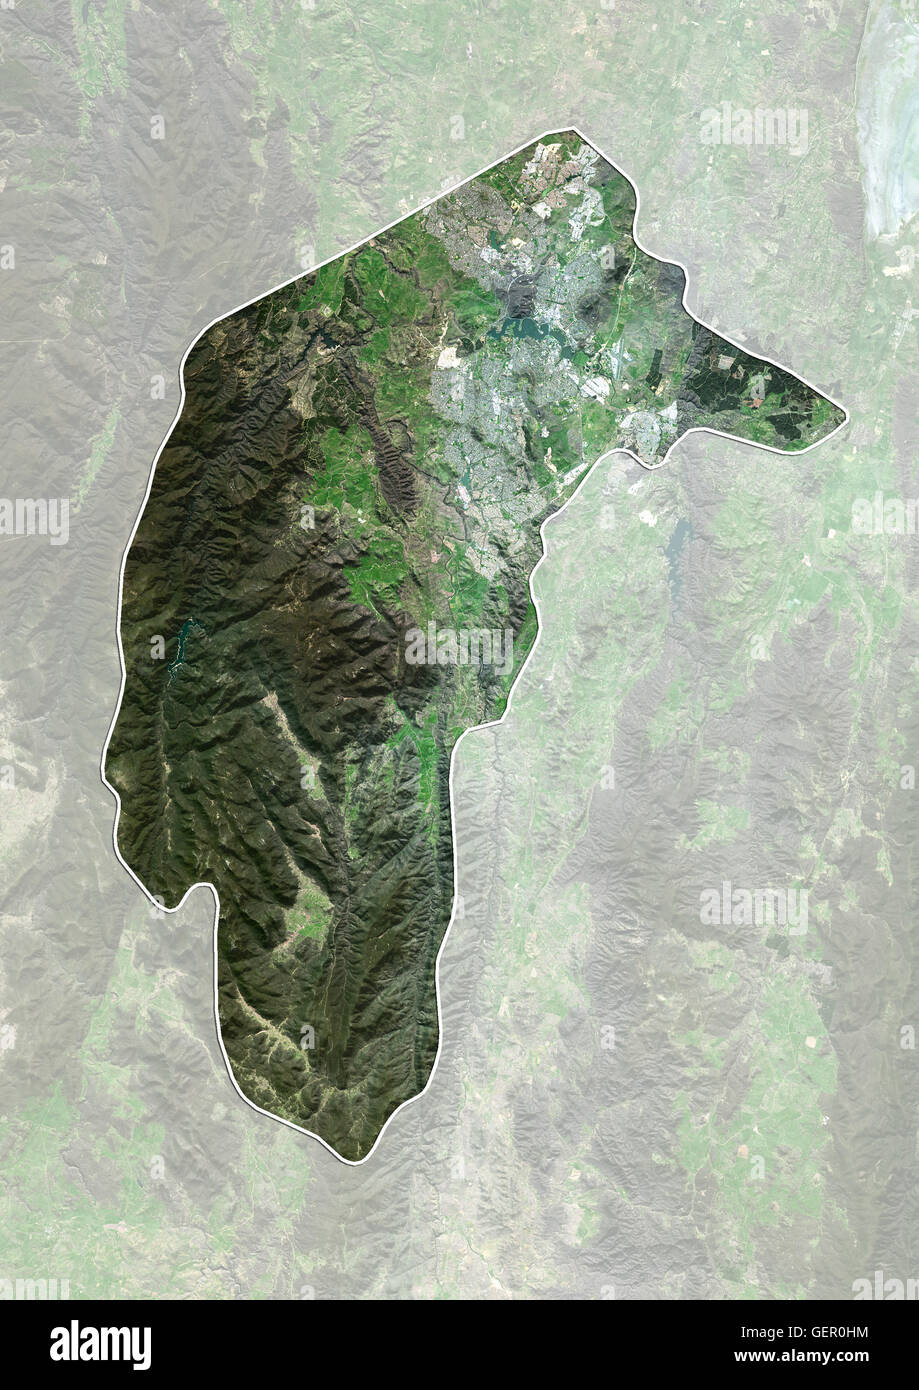 Satellite view of Canberra and the Australian Capital Territory, Australia (with administrative boundaries and mask). Canberra is the capital city of Australia. This image was compiled from data acquired by Landsat 8 satellite in 2014. Stock Photo